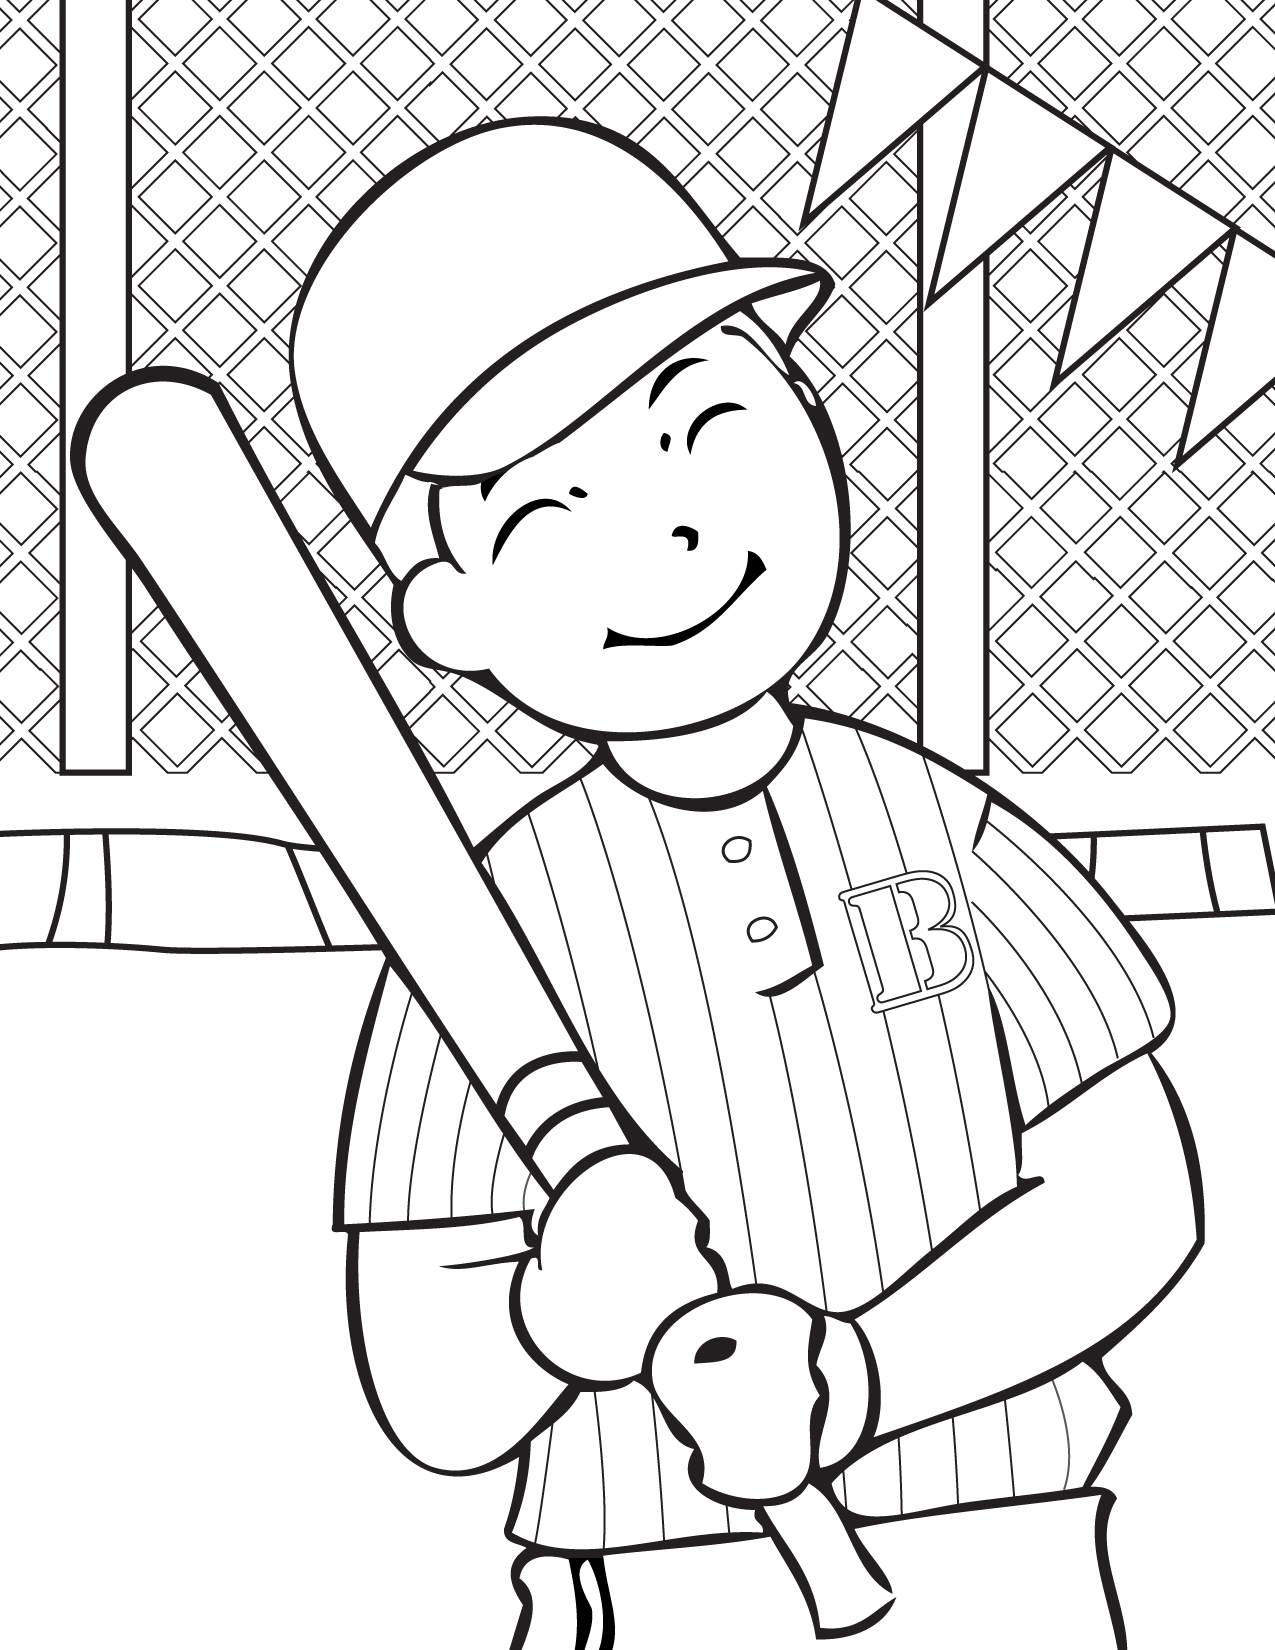 Coloring Pages For Boys Sports at Free printable